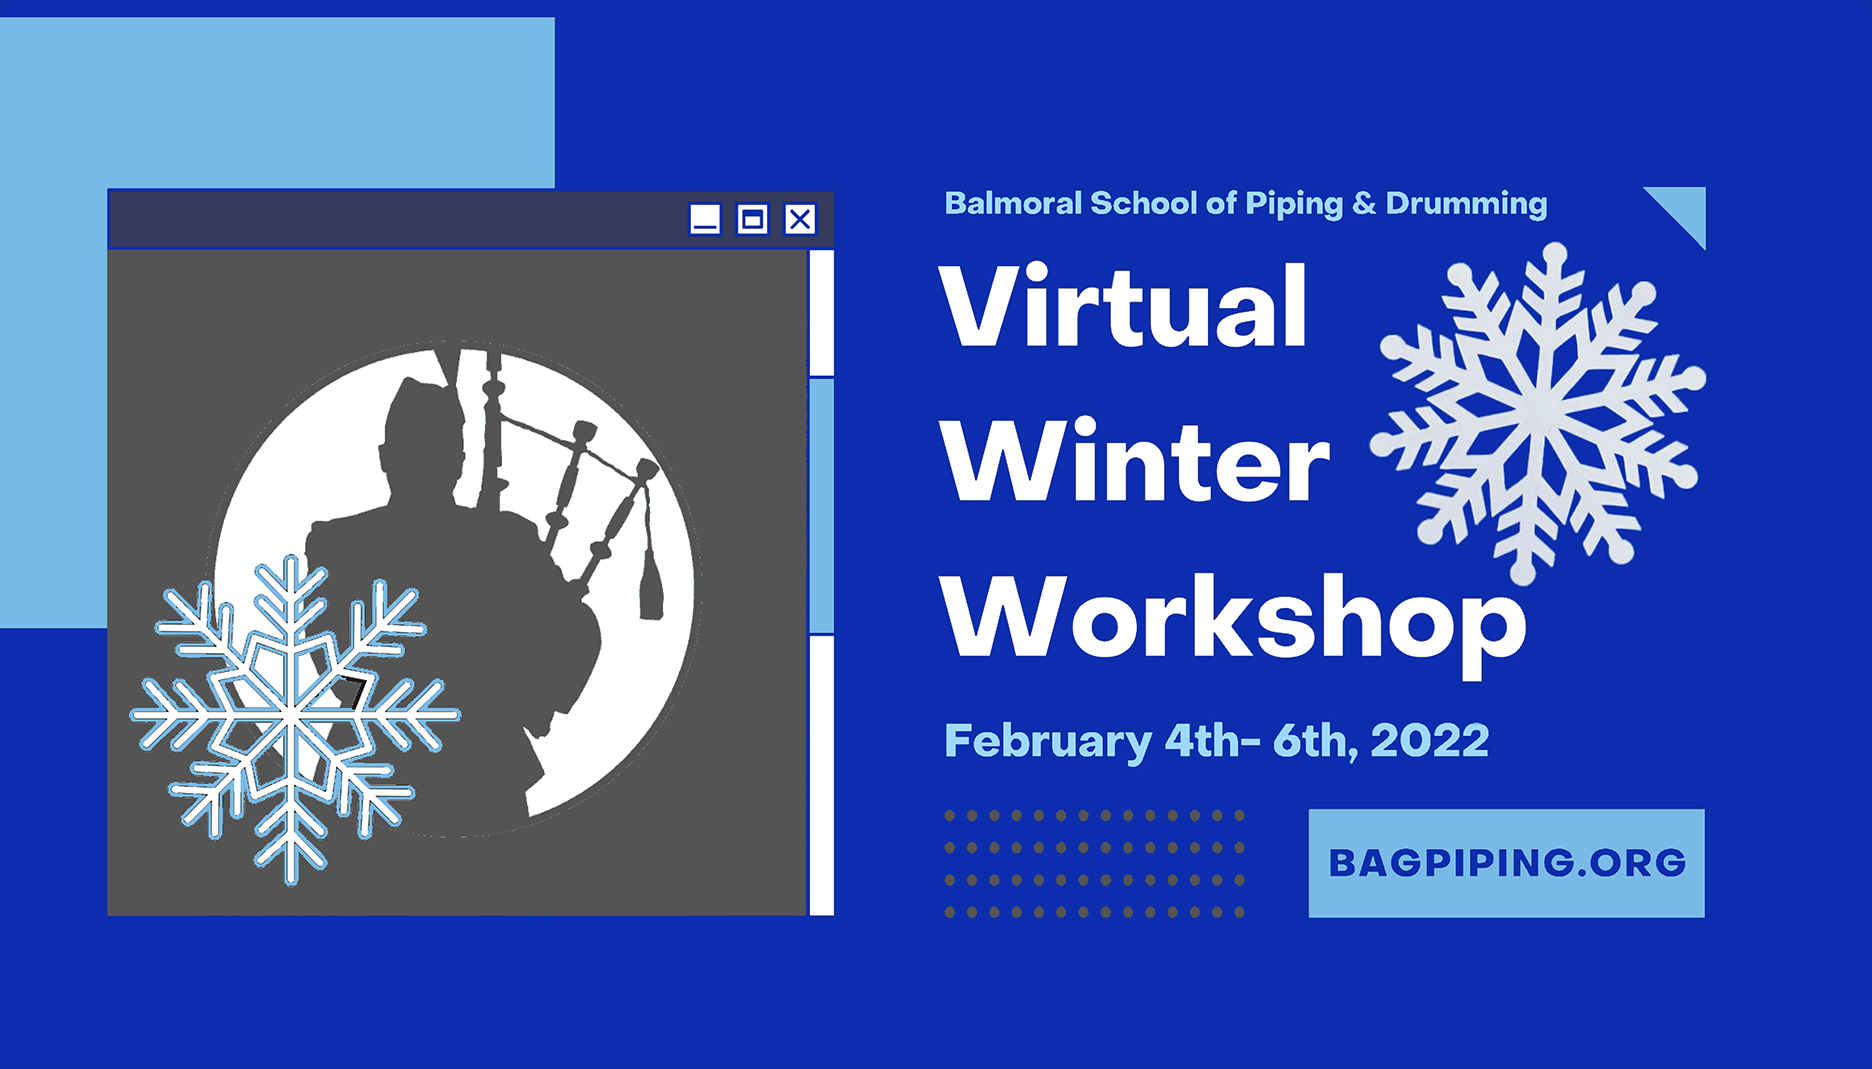 2022 Balmoral Winter Workshop Online with instructors Roddy McLeod, Andrew Carlisle, Bruce Gandy and Robert Mathieson.